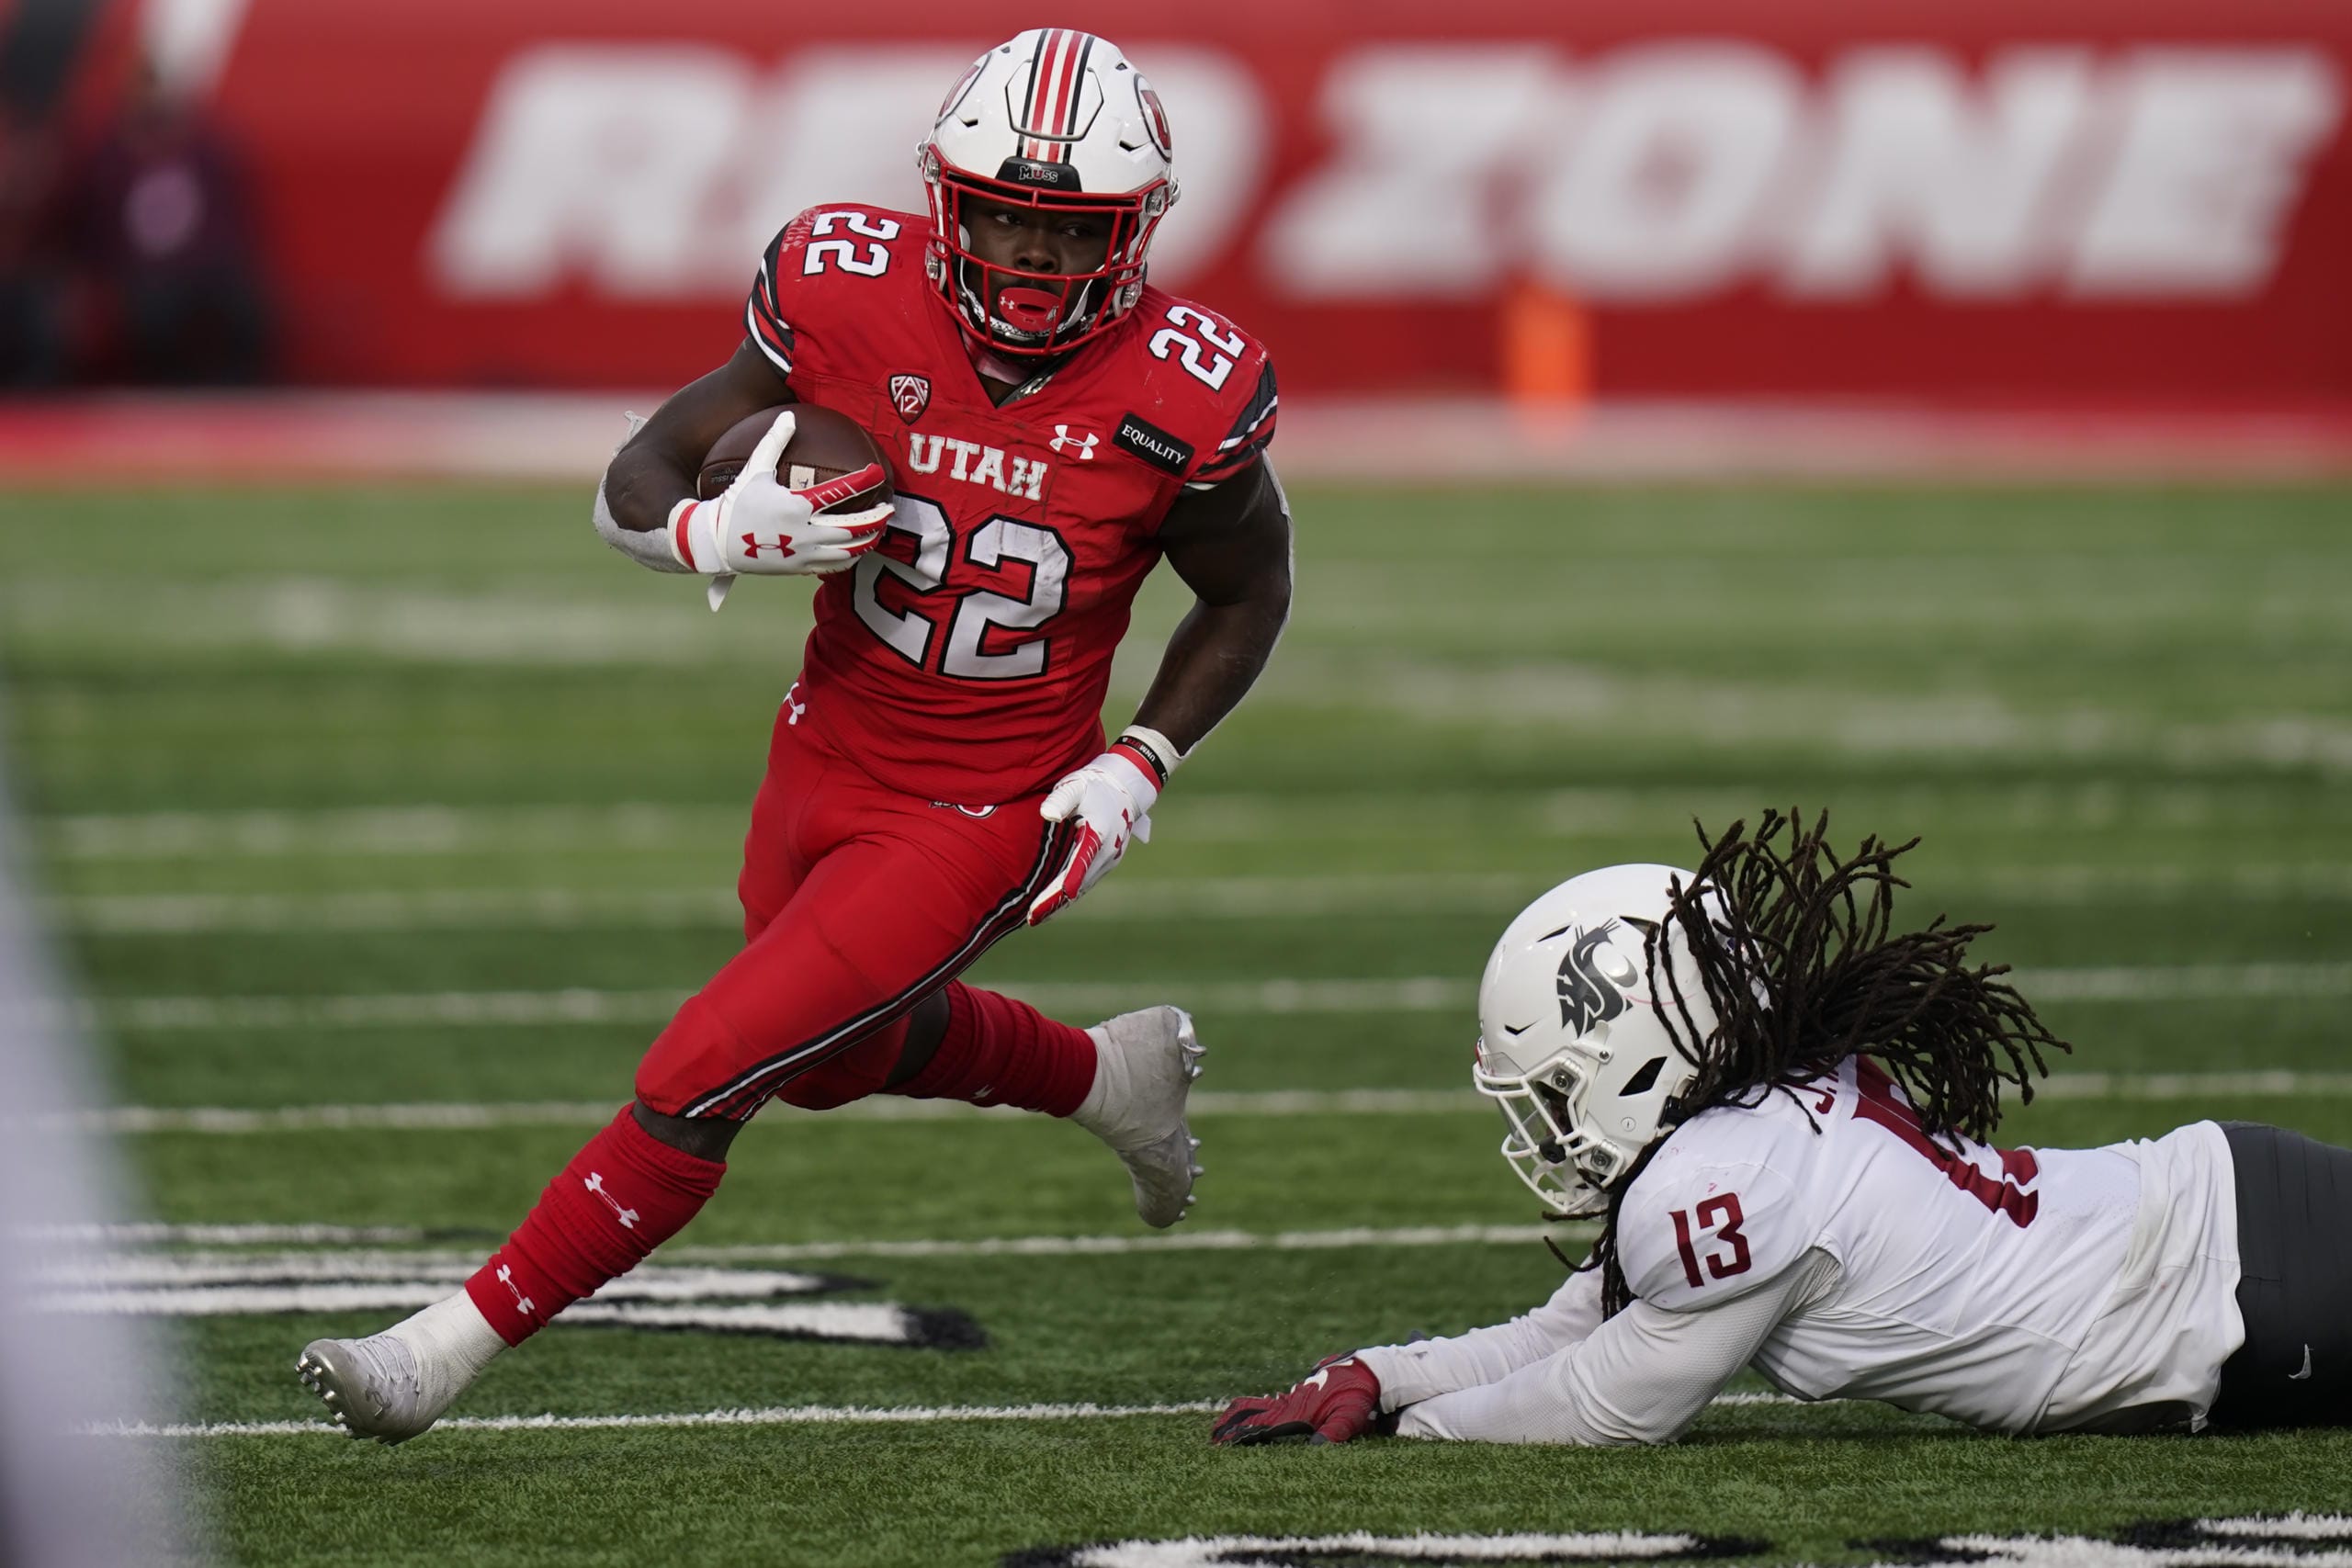 Utah running back Ty Jordan (22), a star freshman running back for the University of Utah who grew up in the Dallas area, has died, school officials announced Saturday, Dec. 26, 2020. Authorities in Texas and Utah have not released details about the circumstances of the Jordan's death. He finished the 2020 season by rushing for 154 yards and three touchdowns against Washington State on Dec. 19, 2020.